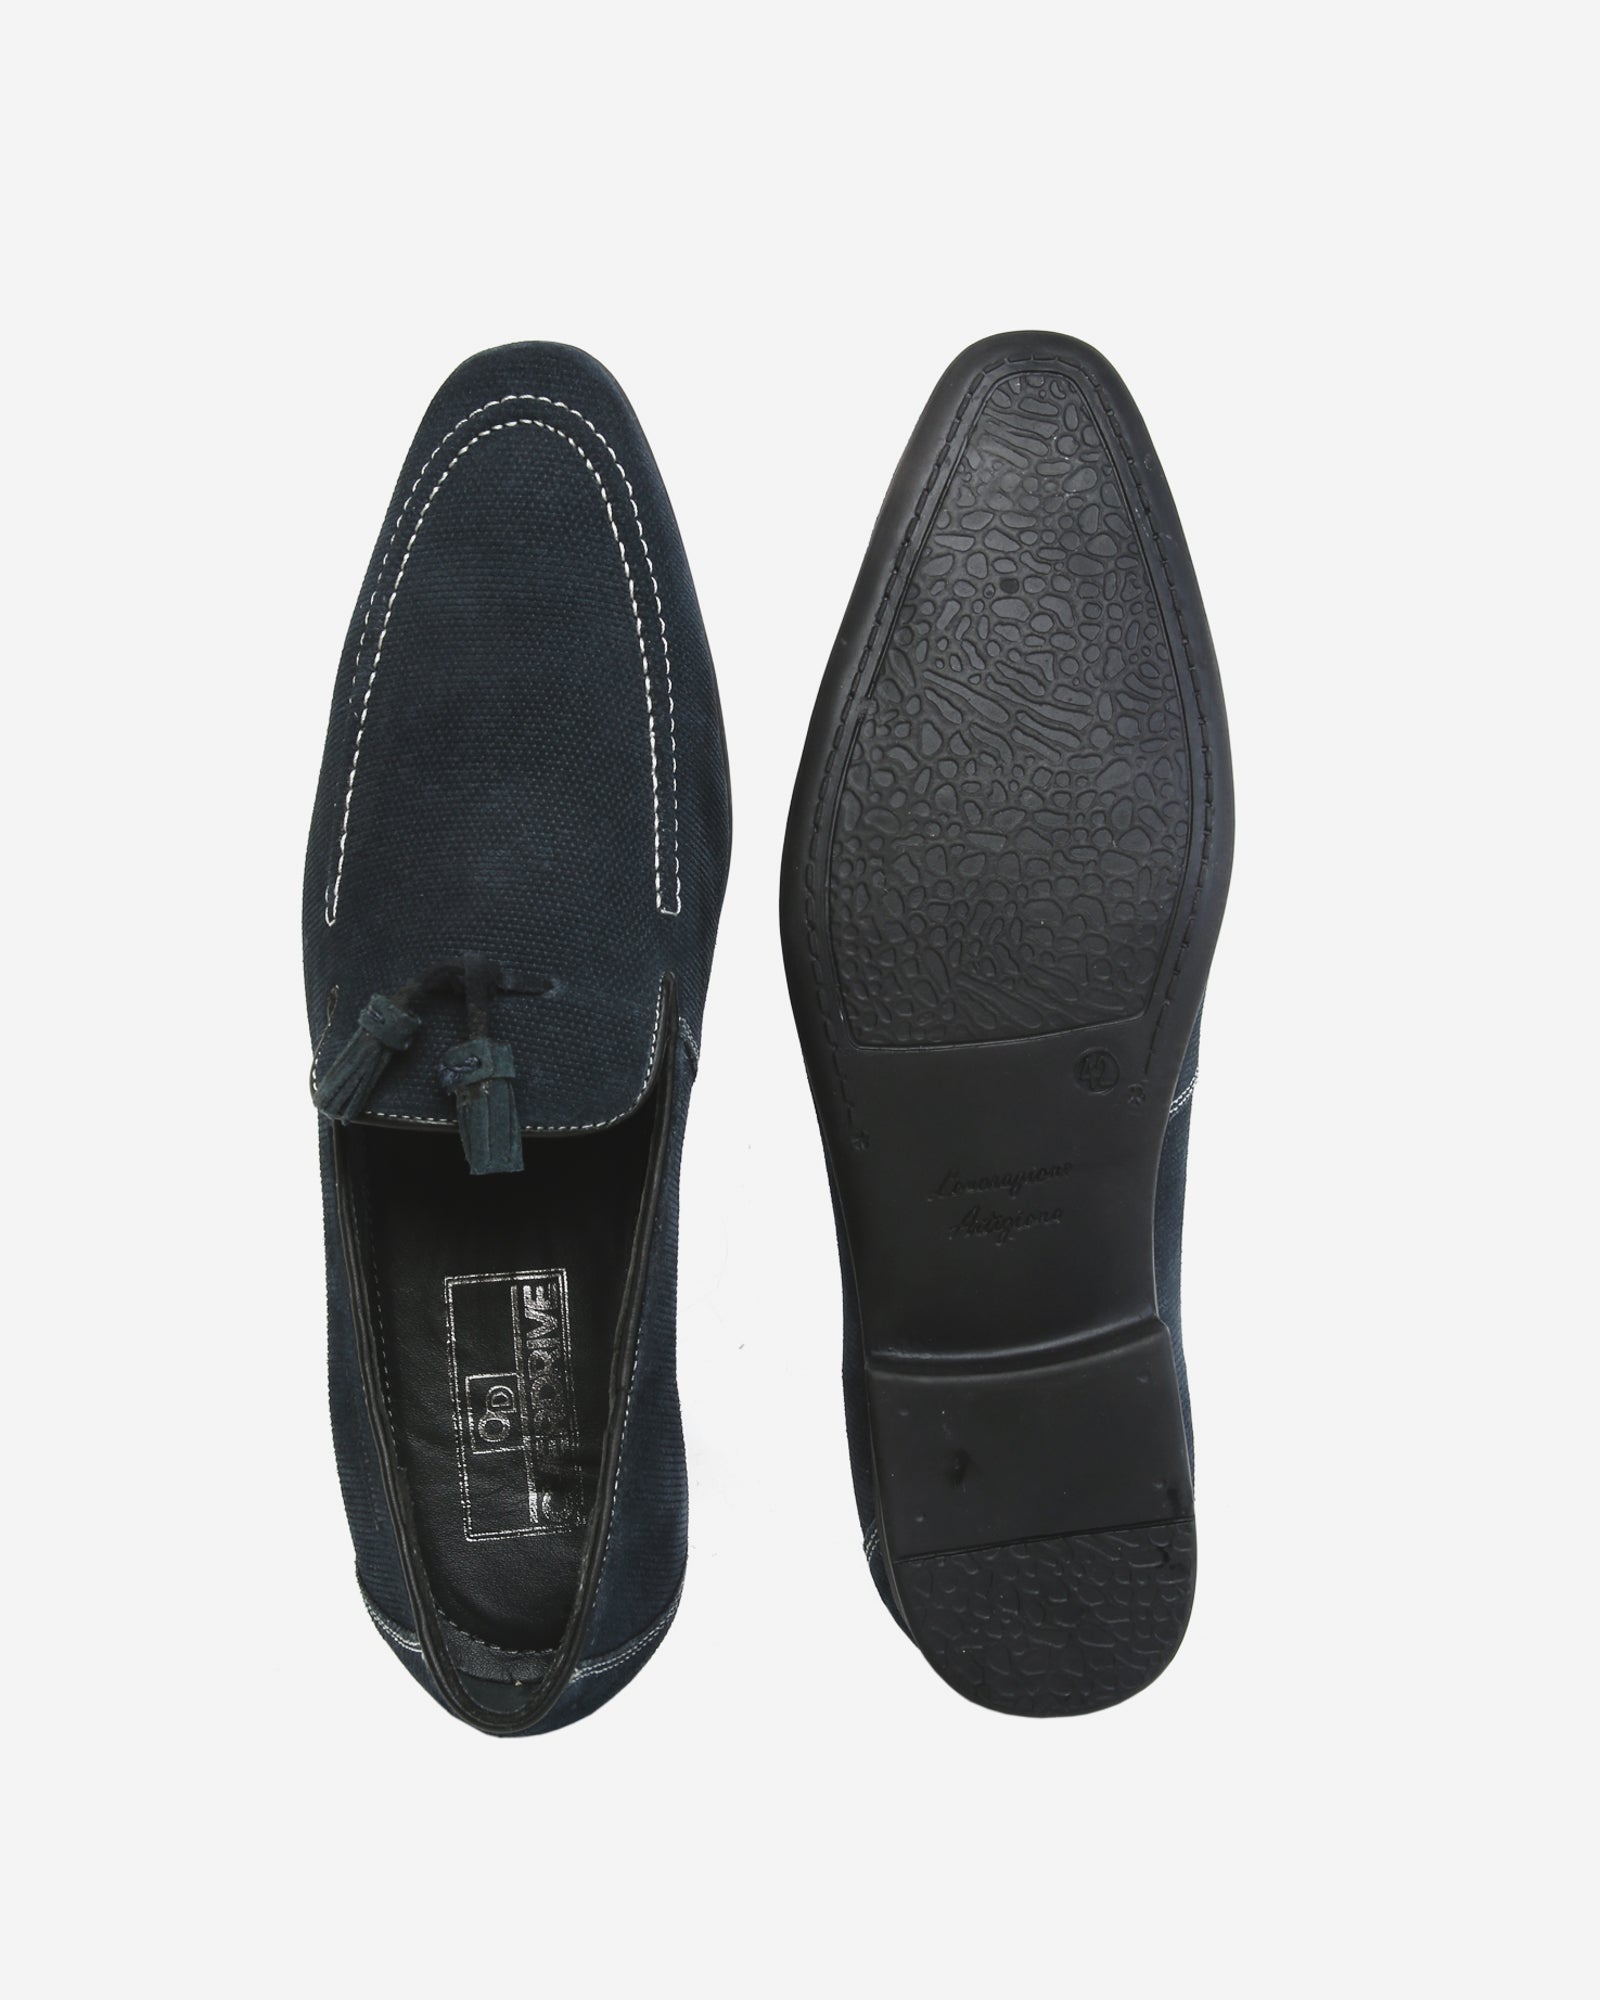 Denims Blue Loafer with Tassels